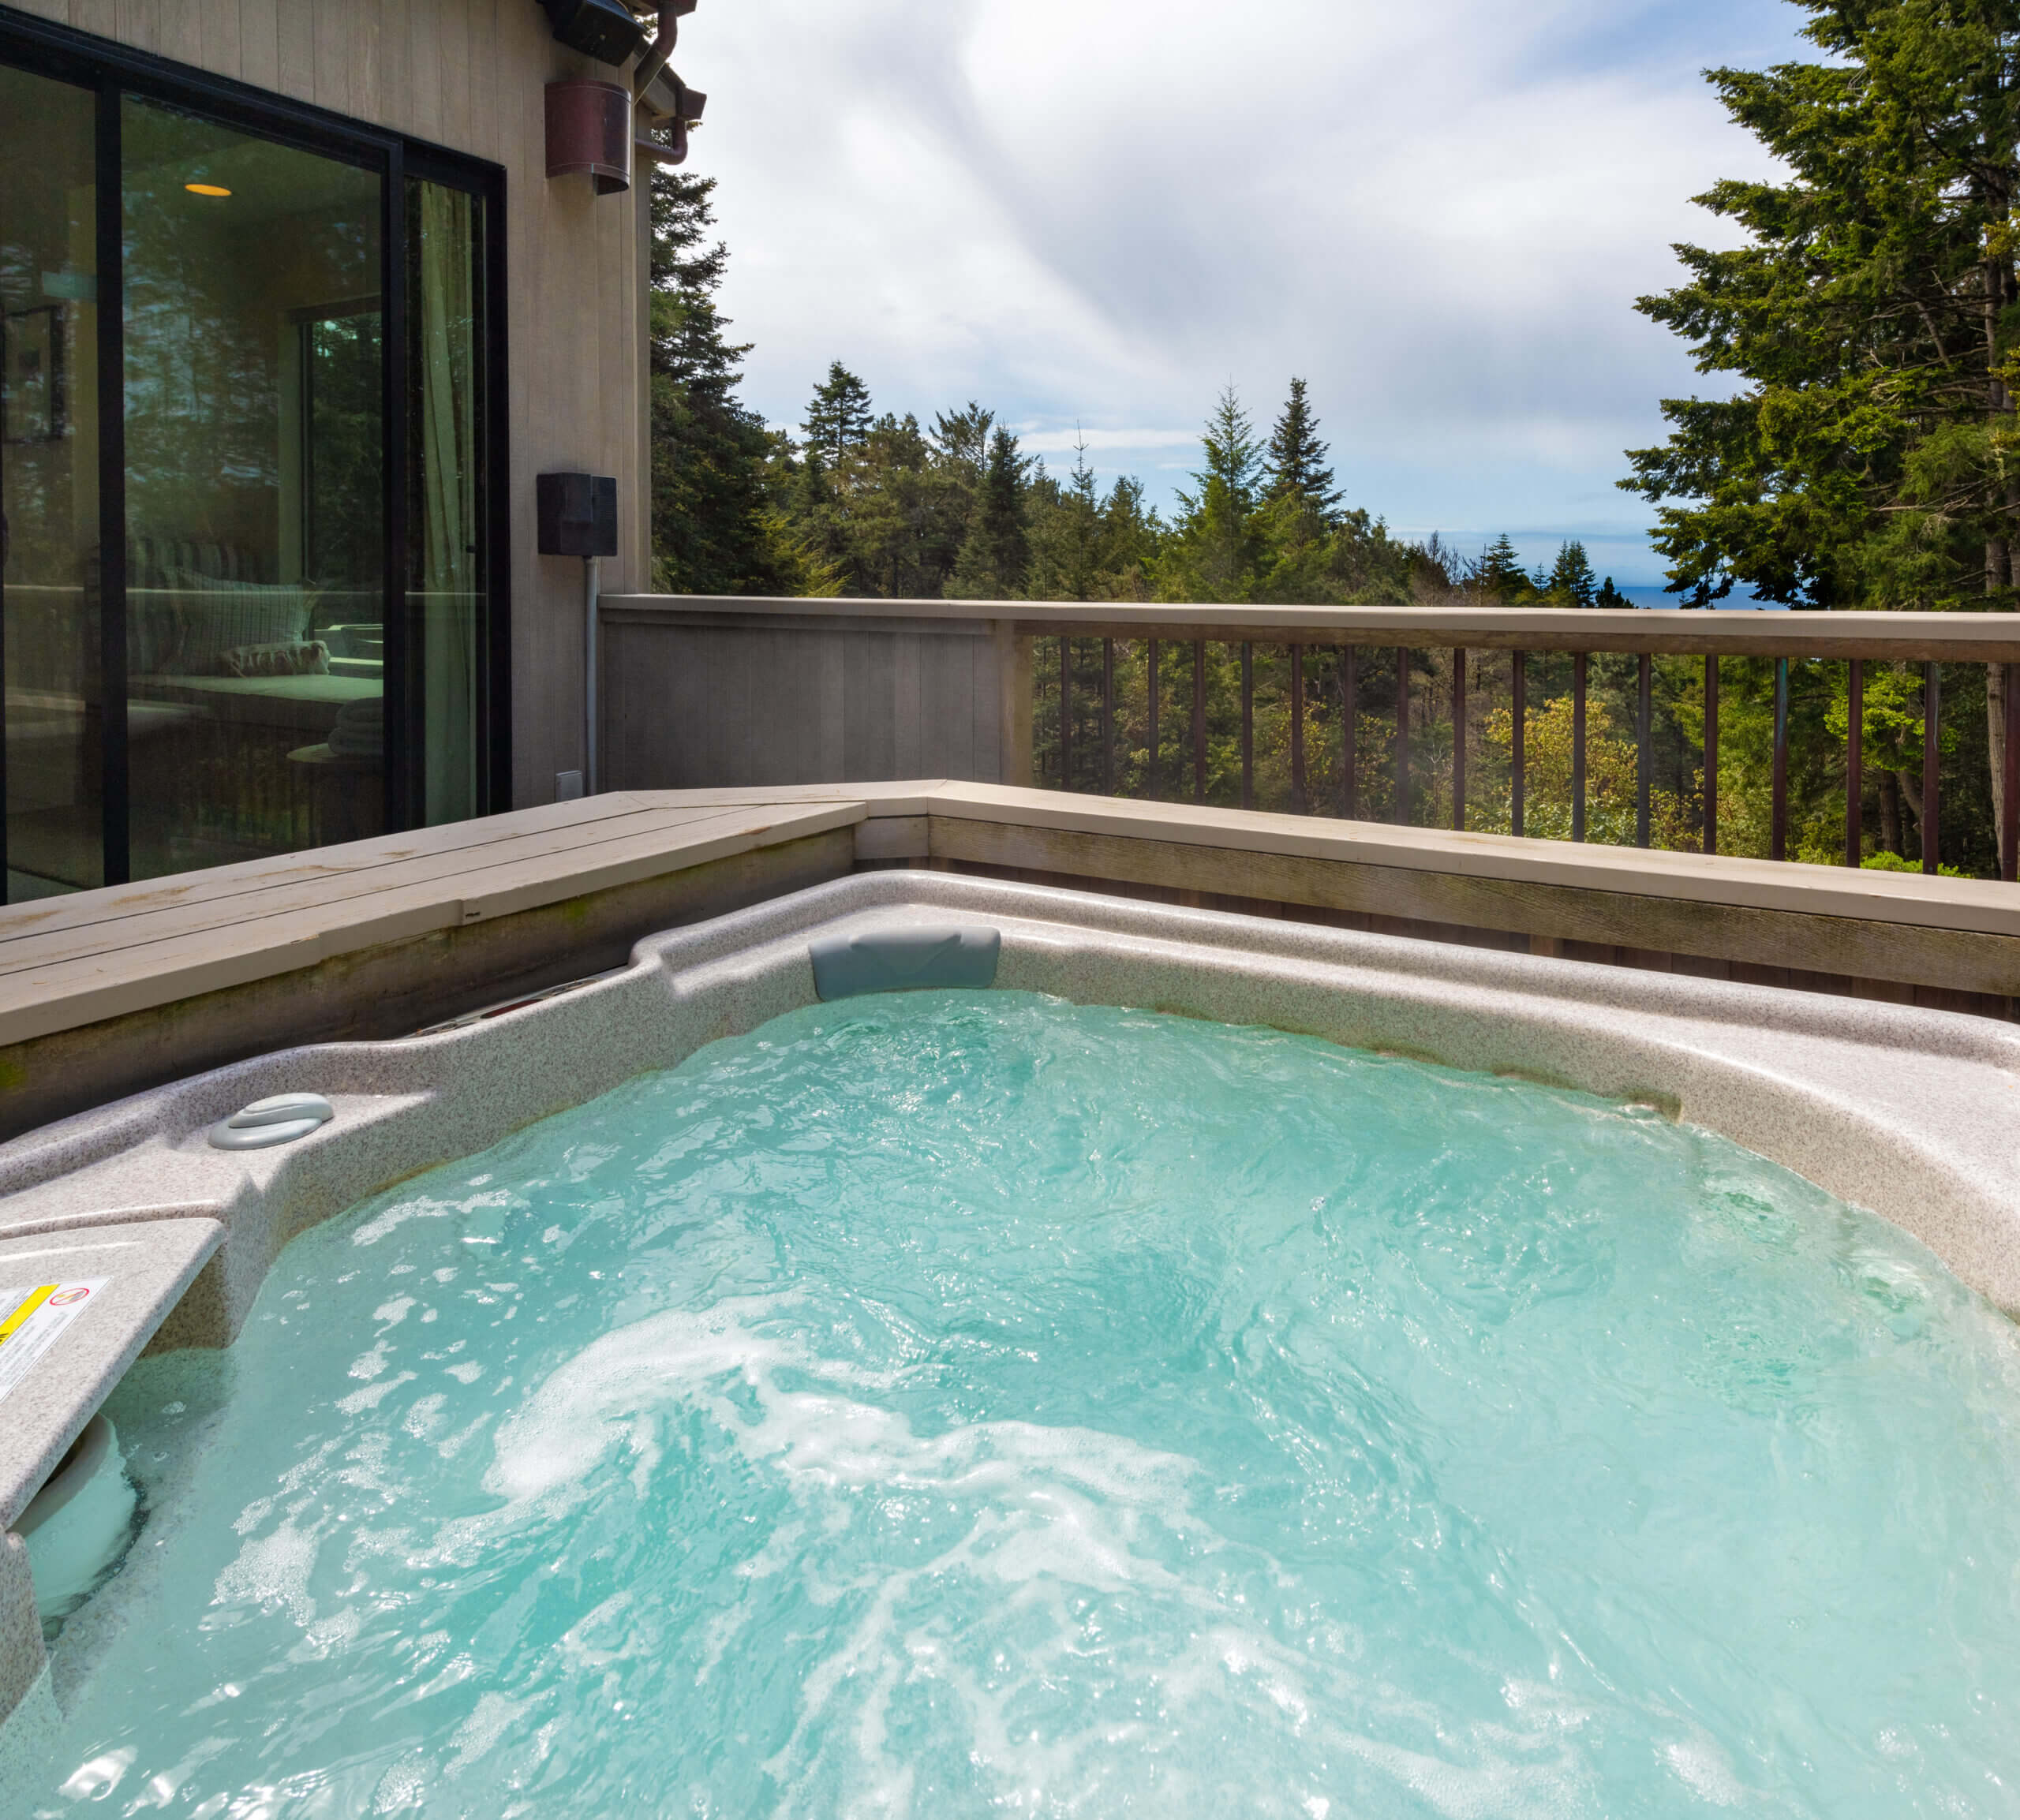 Sea Ridge hot tub on deck with view of pine trees and ocean